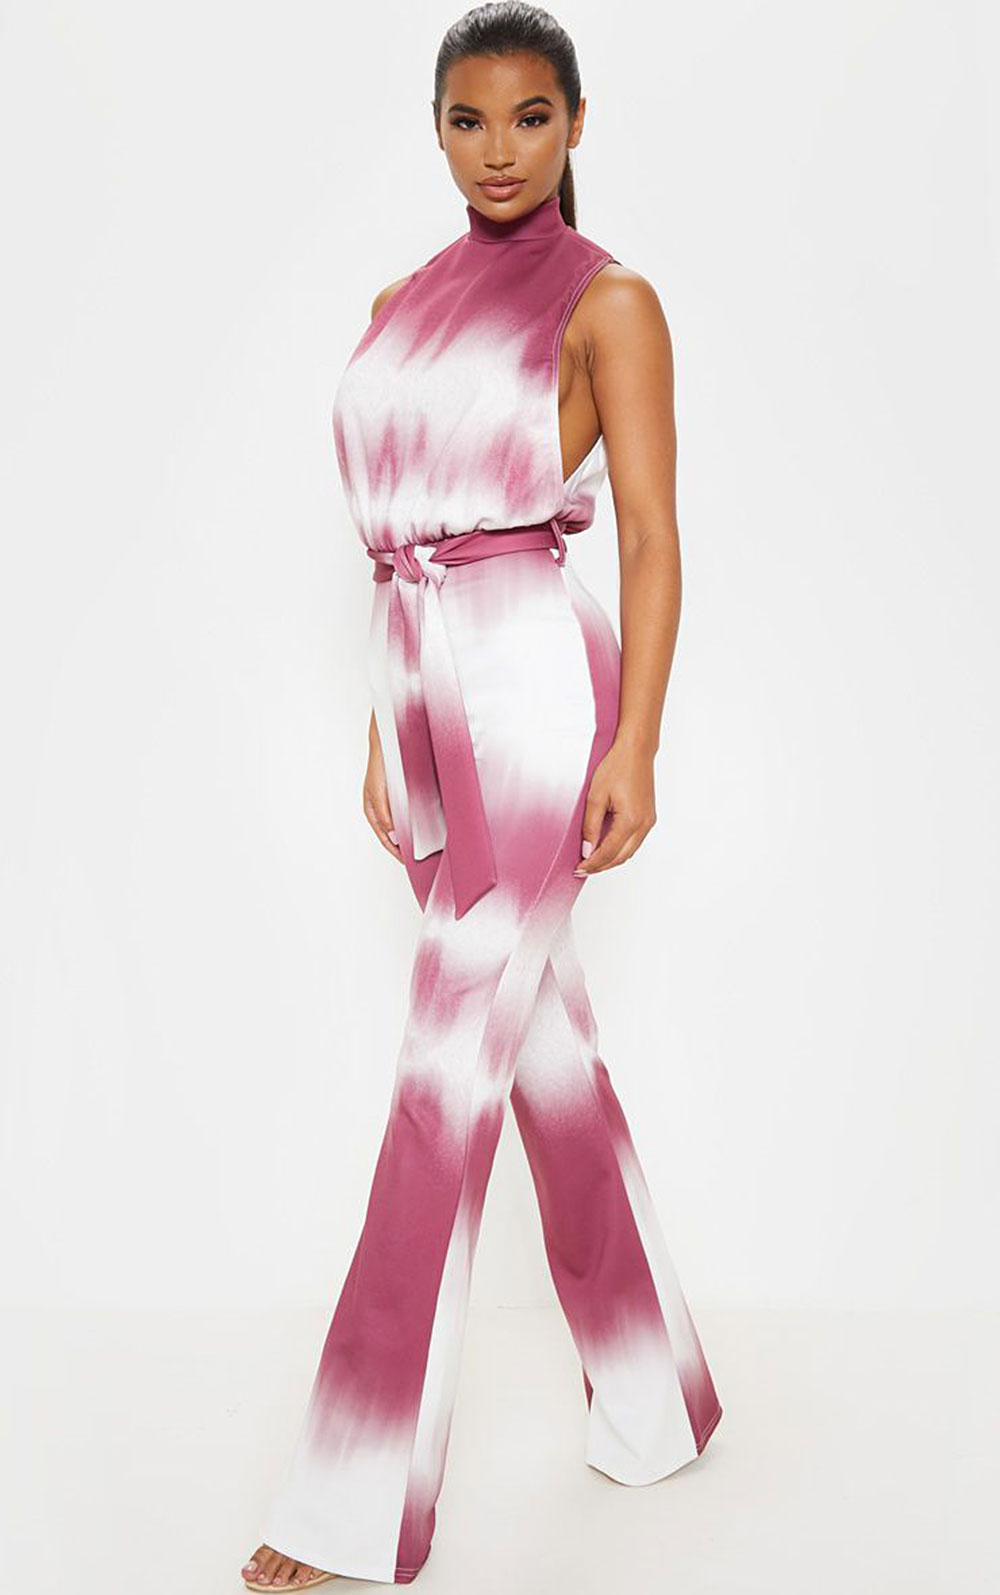 PrettyLittleThing Launches Wine Spill-Inspired Jumpsuit: Pics | Us Weekly